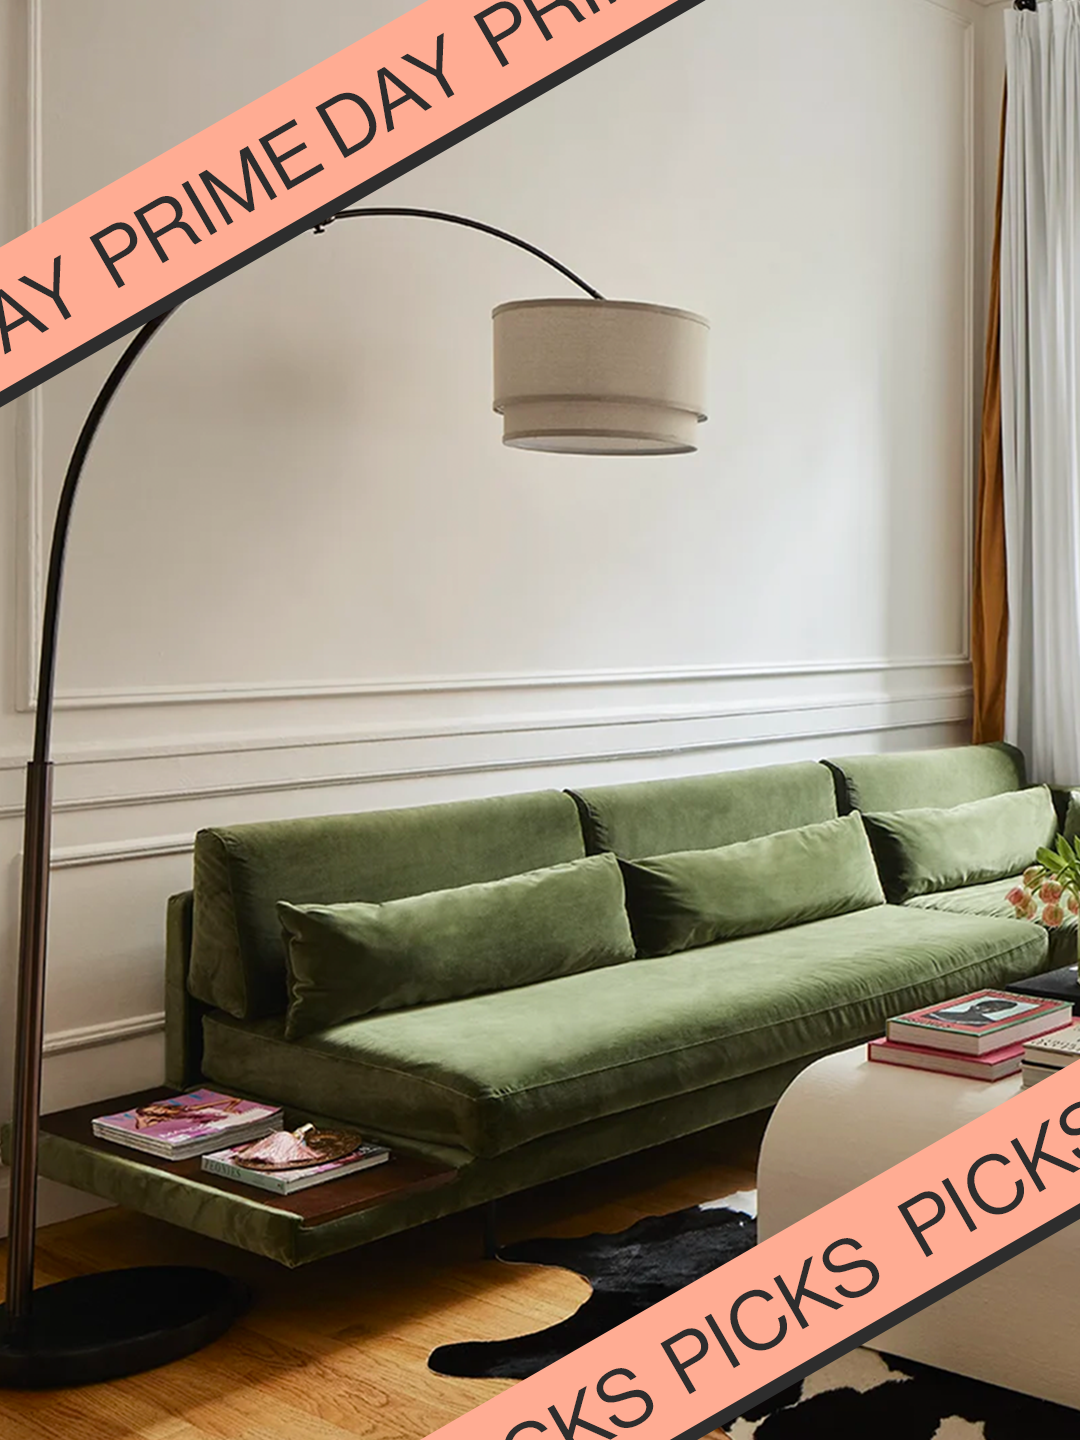 green velvet couch in living room with arched bronze lamp curved overhead in Brynn Whitfield's living room with Prime Day banner.